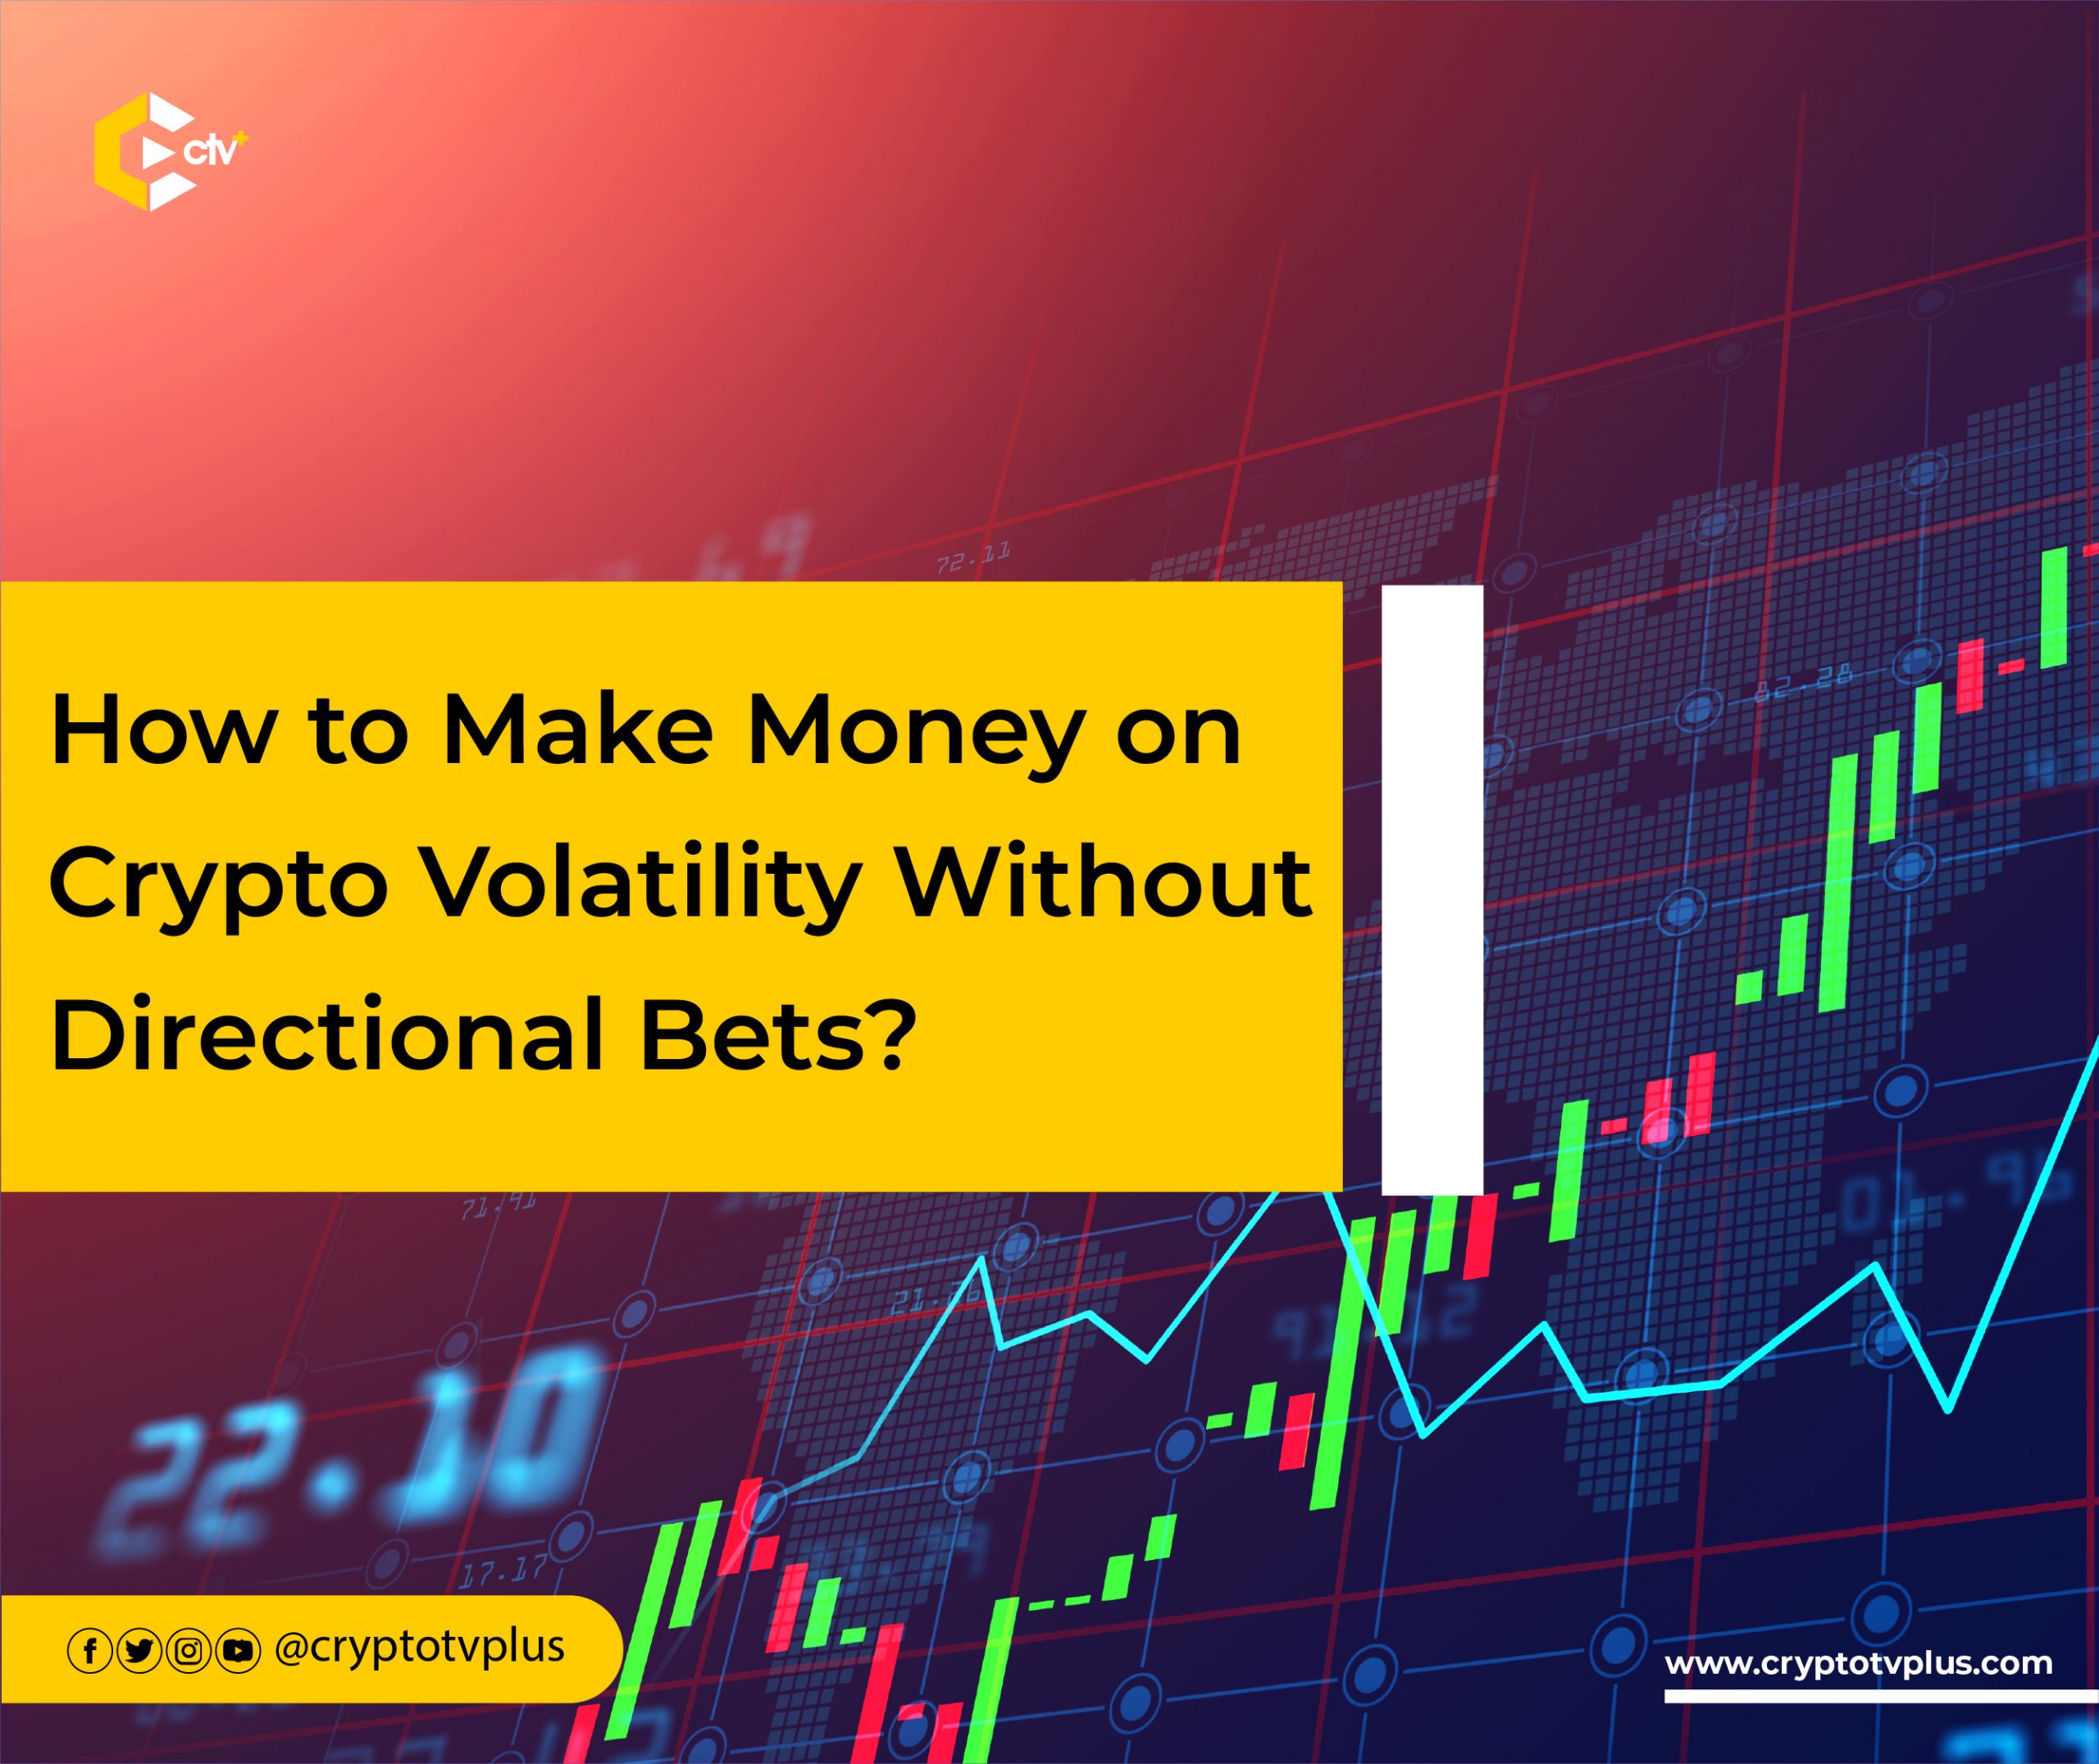 How to make money on crypto volatility without making directional bets